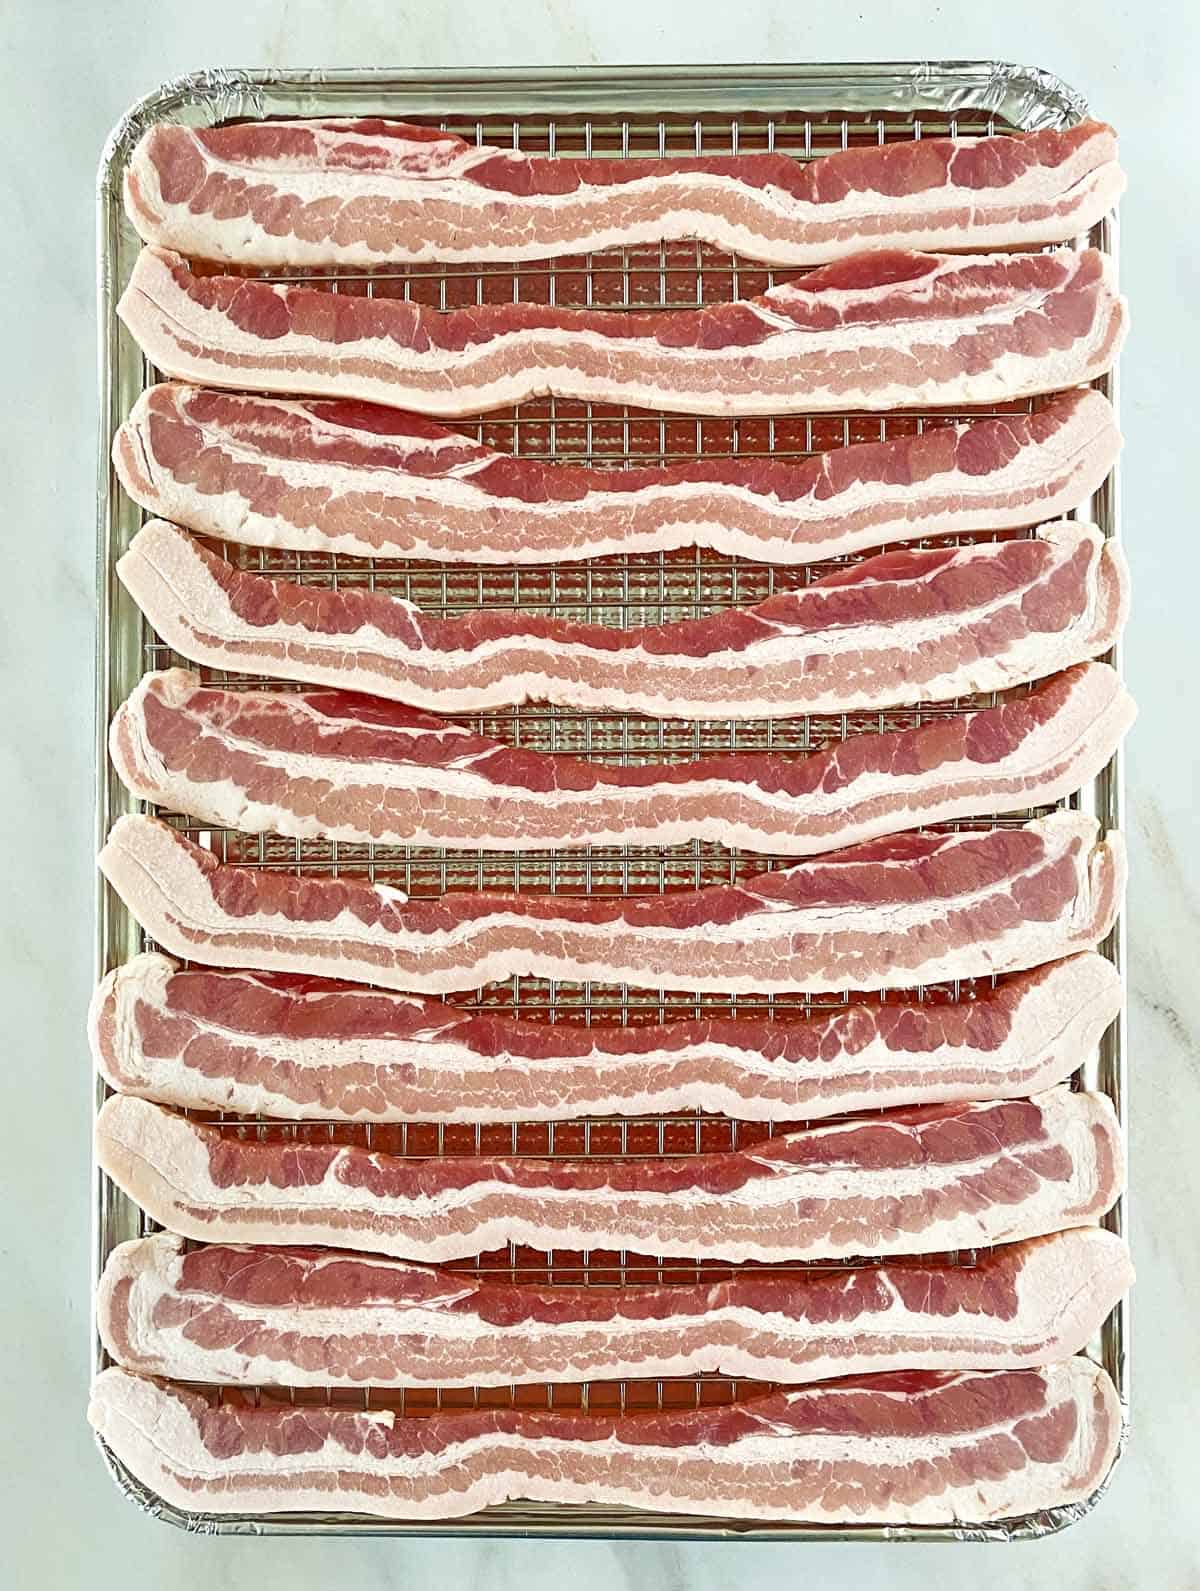 10 slices of thick cut bacon on a wire cooking rack set inside a disposable foil baking sheet.